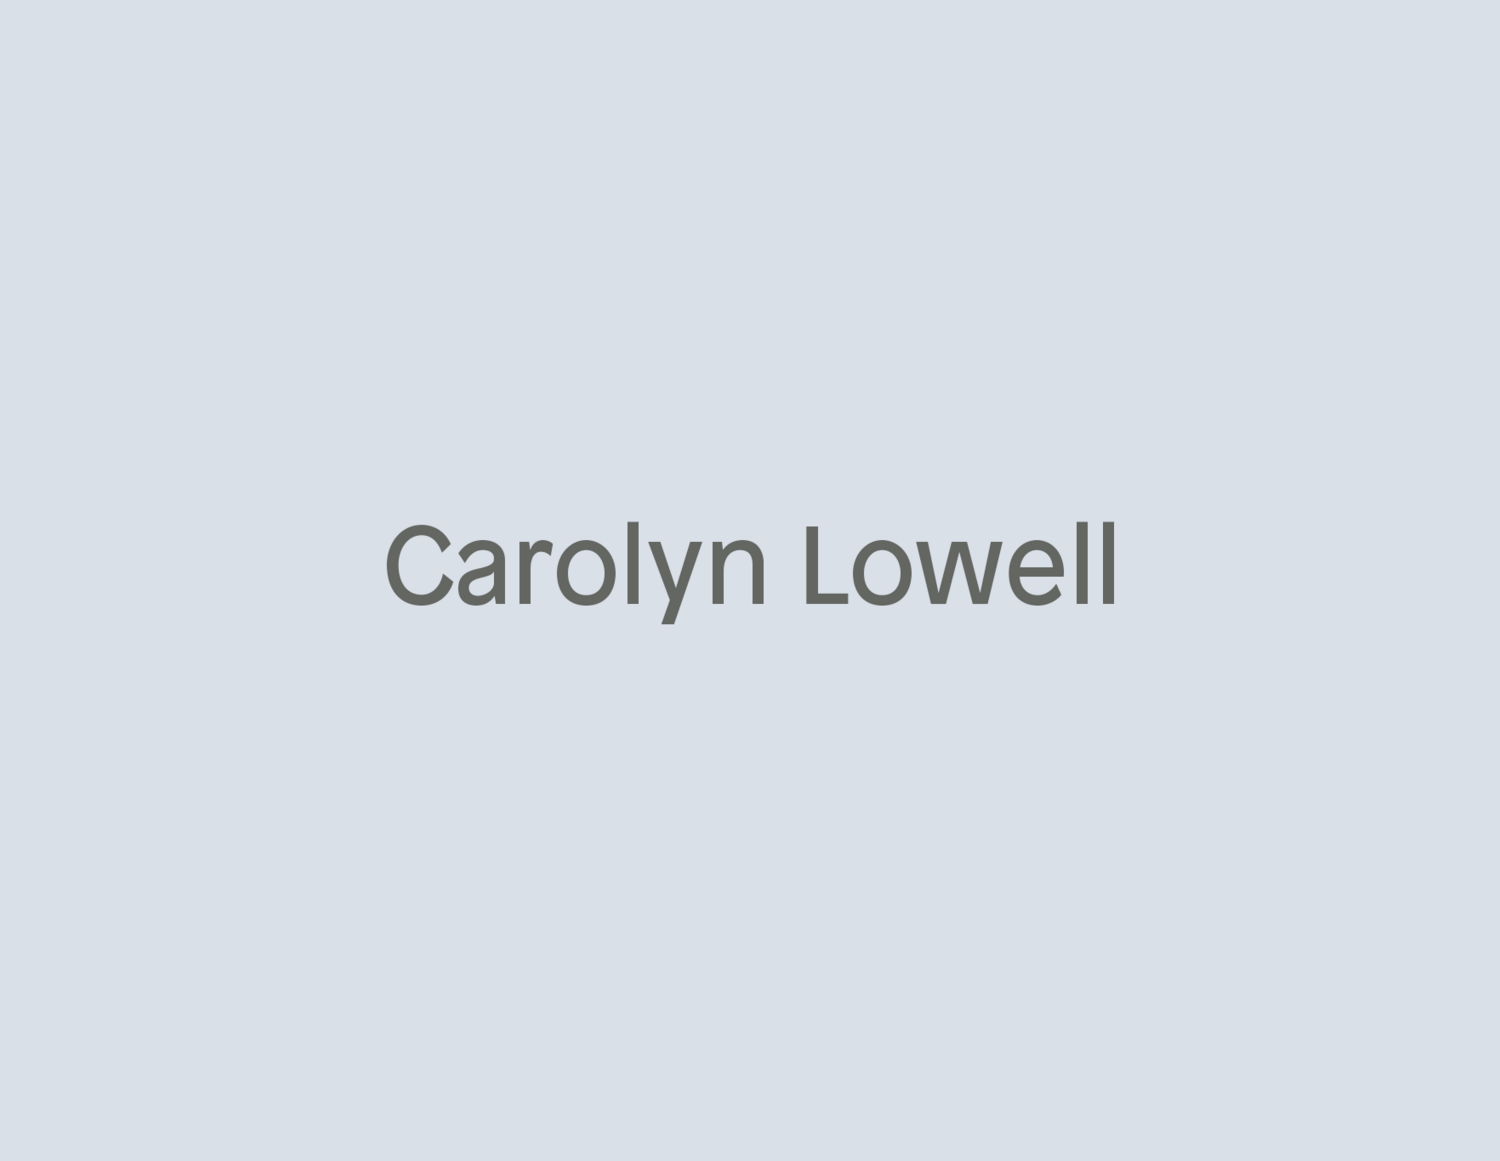 carolyn lowell hover